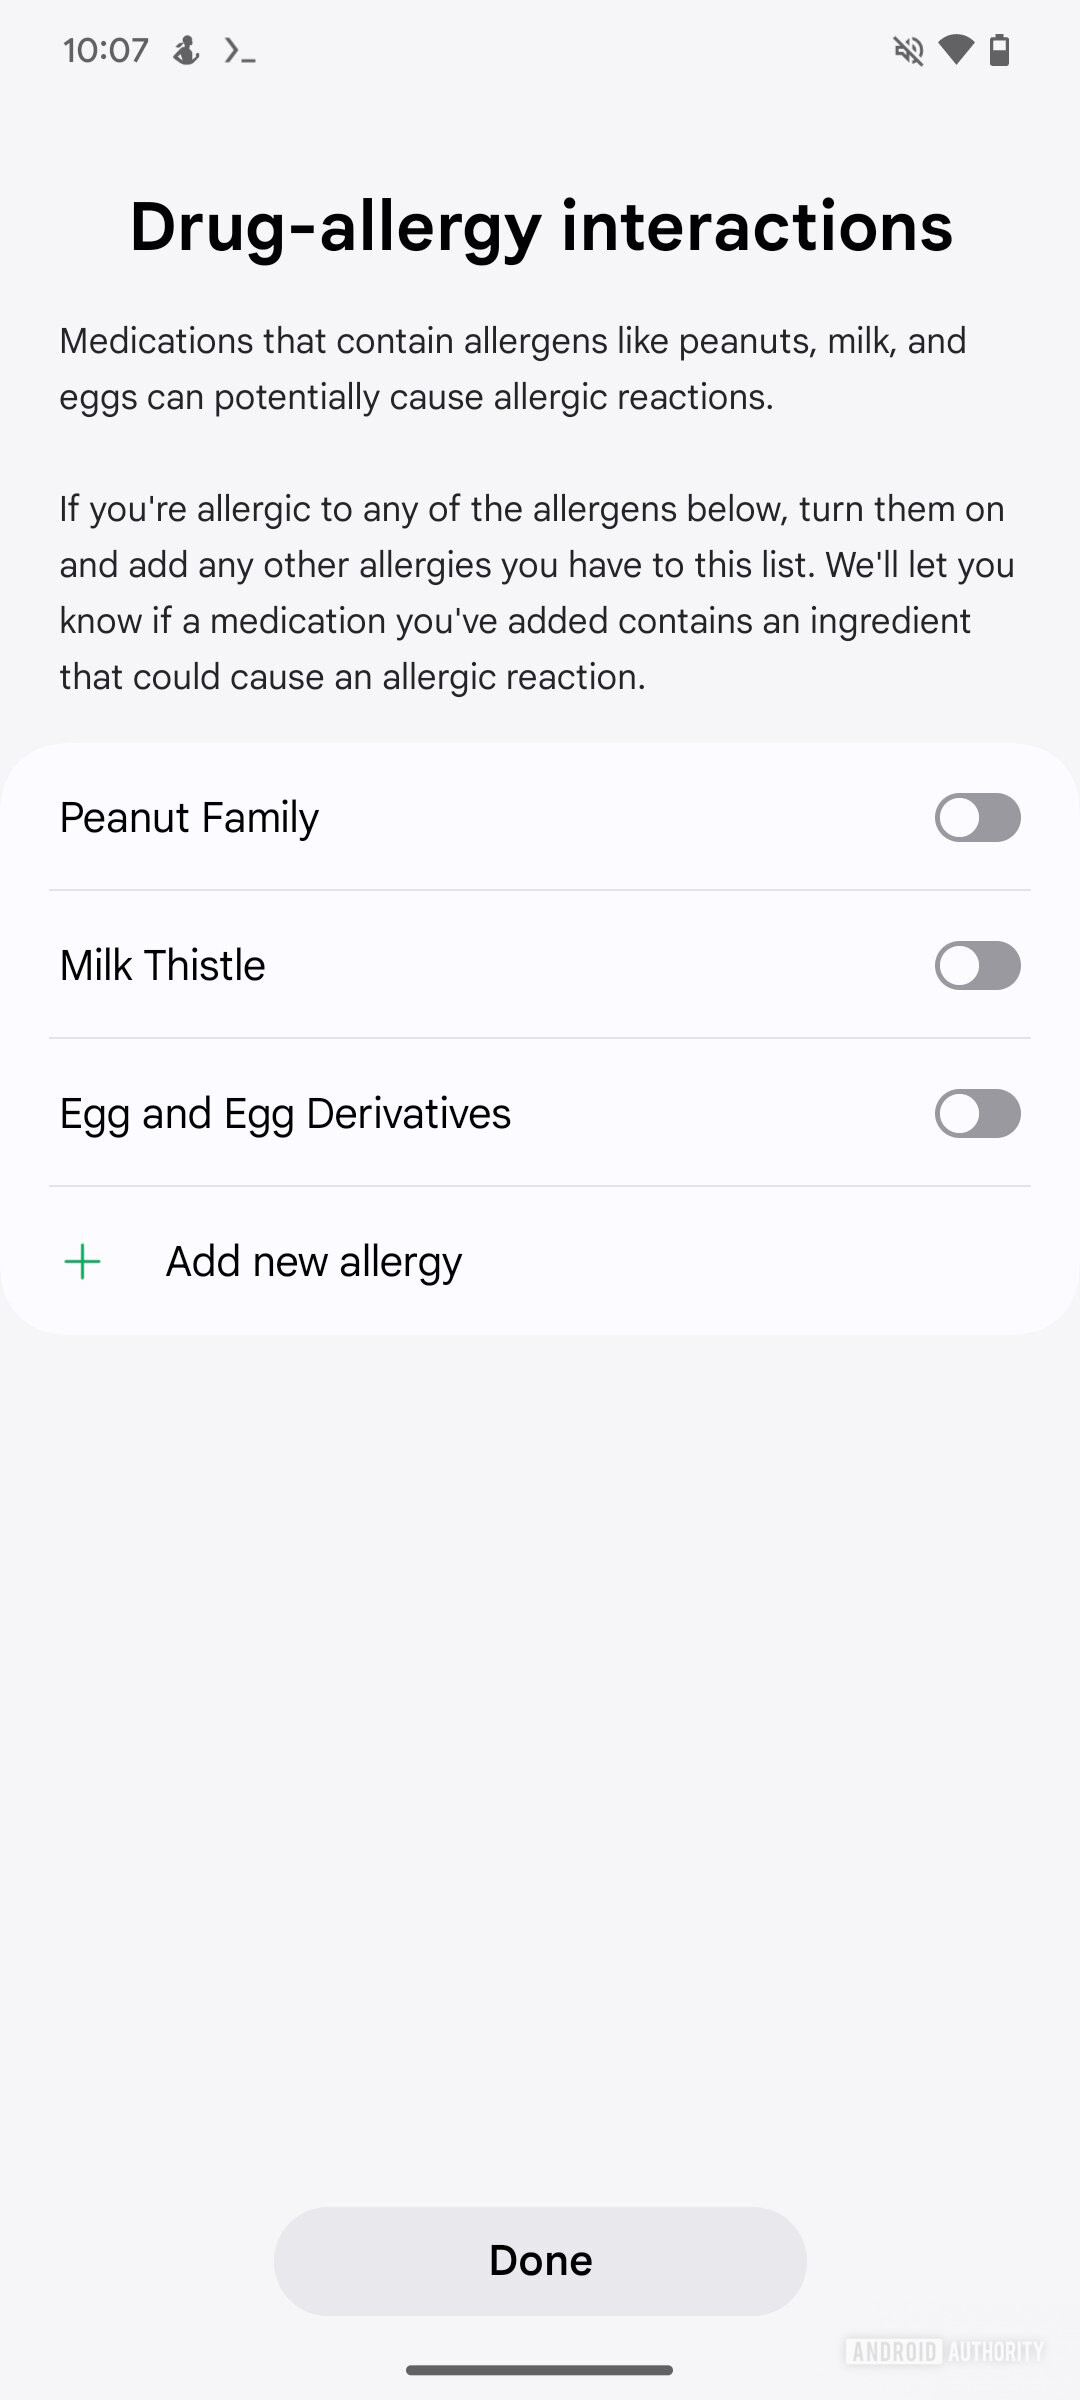 Allergic Drug Interactions with Samsung Health